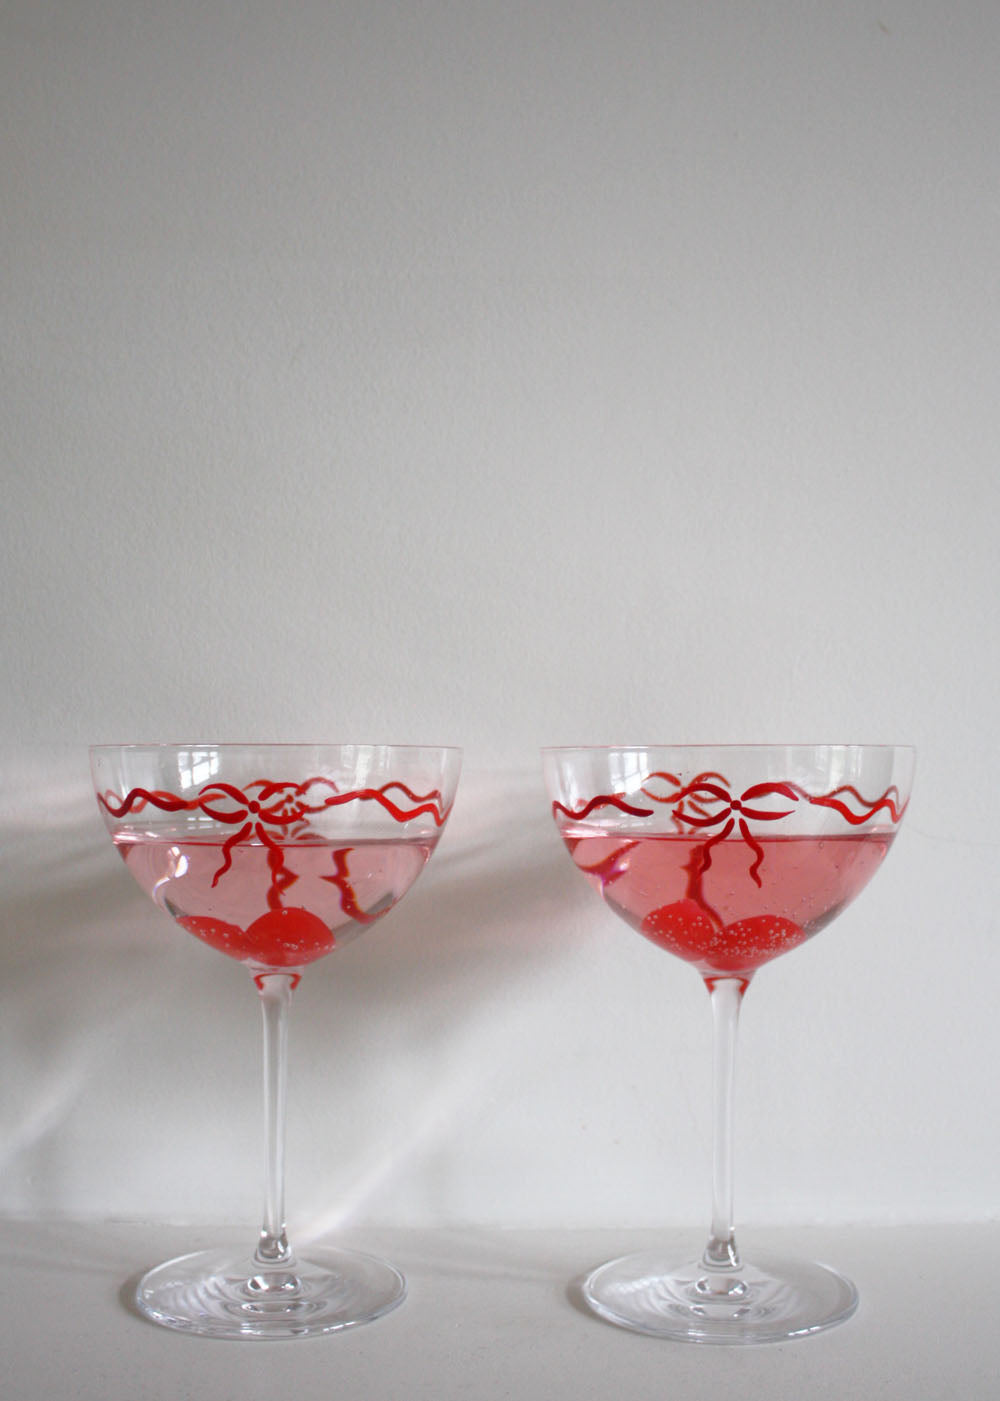 Limited Edition hand painted red bow coupe glasses pair